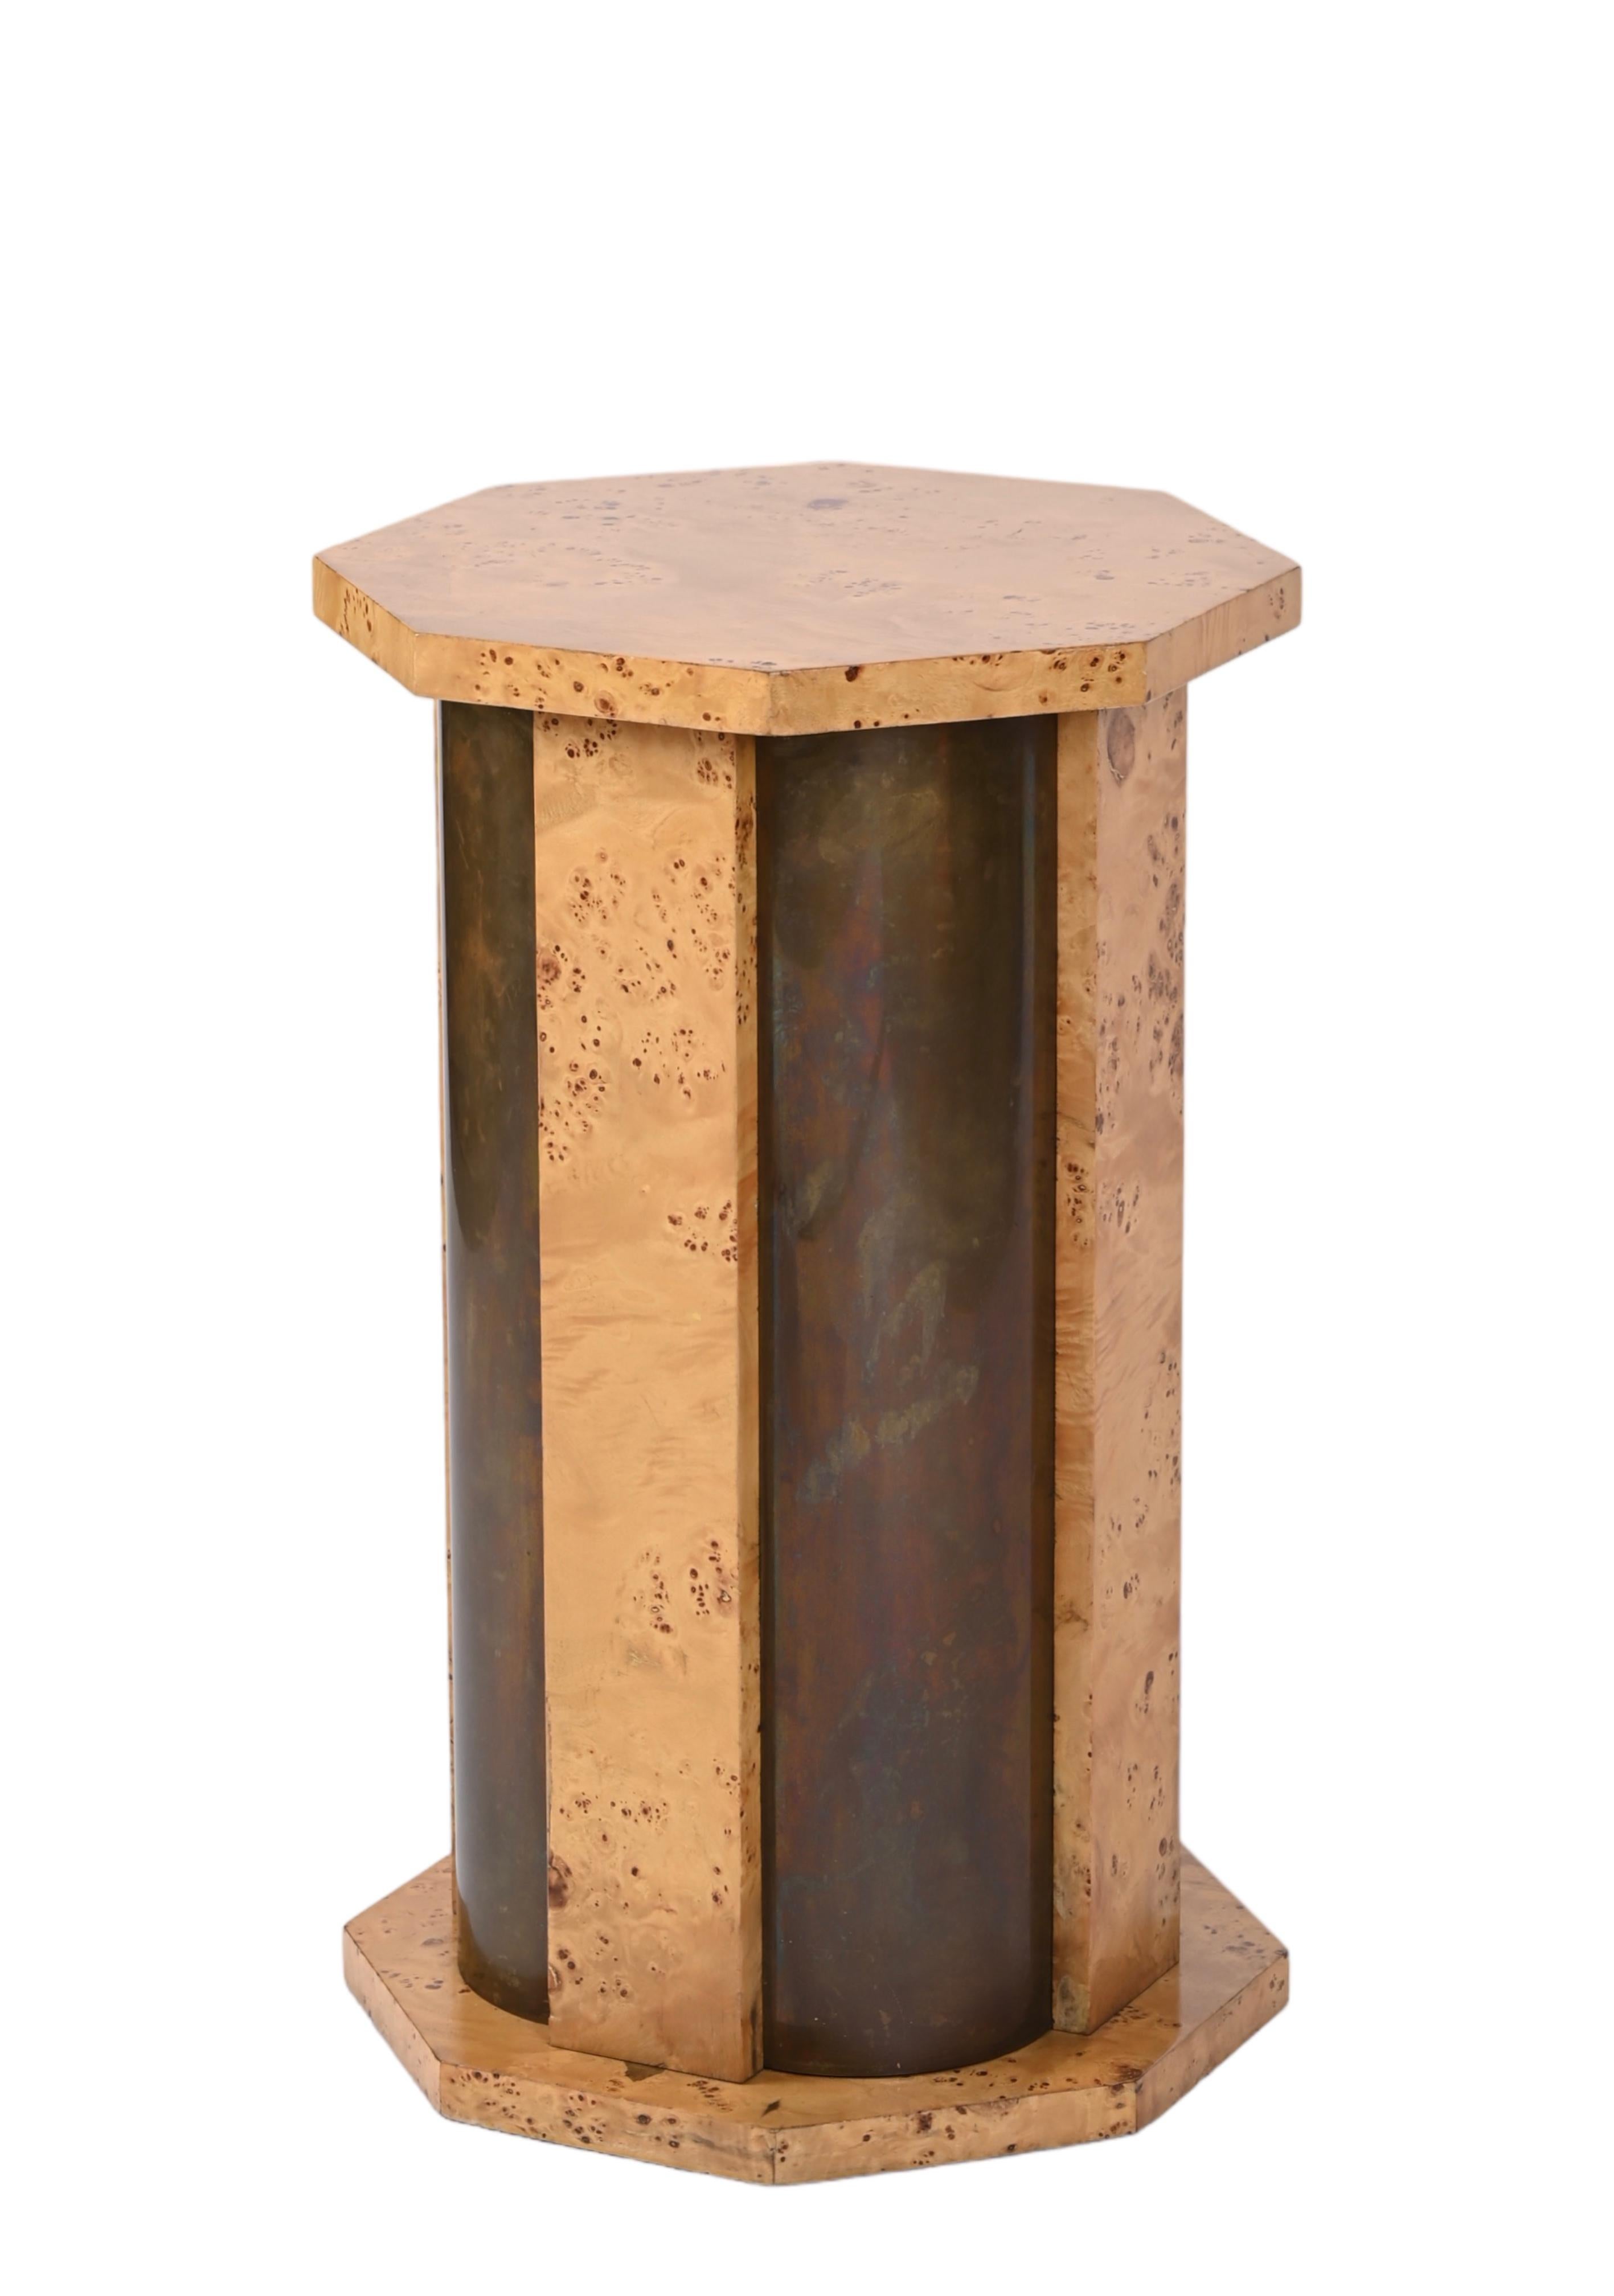 Tommaso Barbi Octagonal Table Pedestal in Burl Wood and Brass, Italy, 1970 For Sale 2